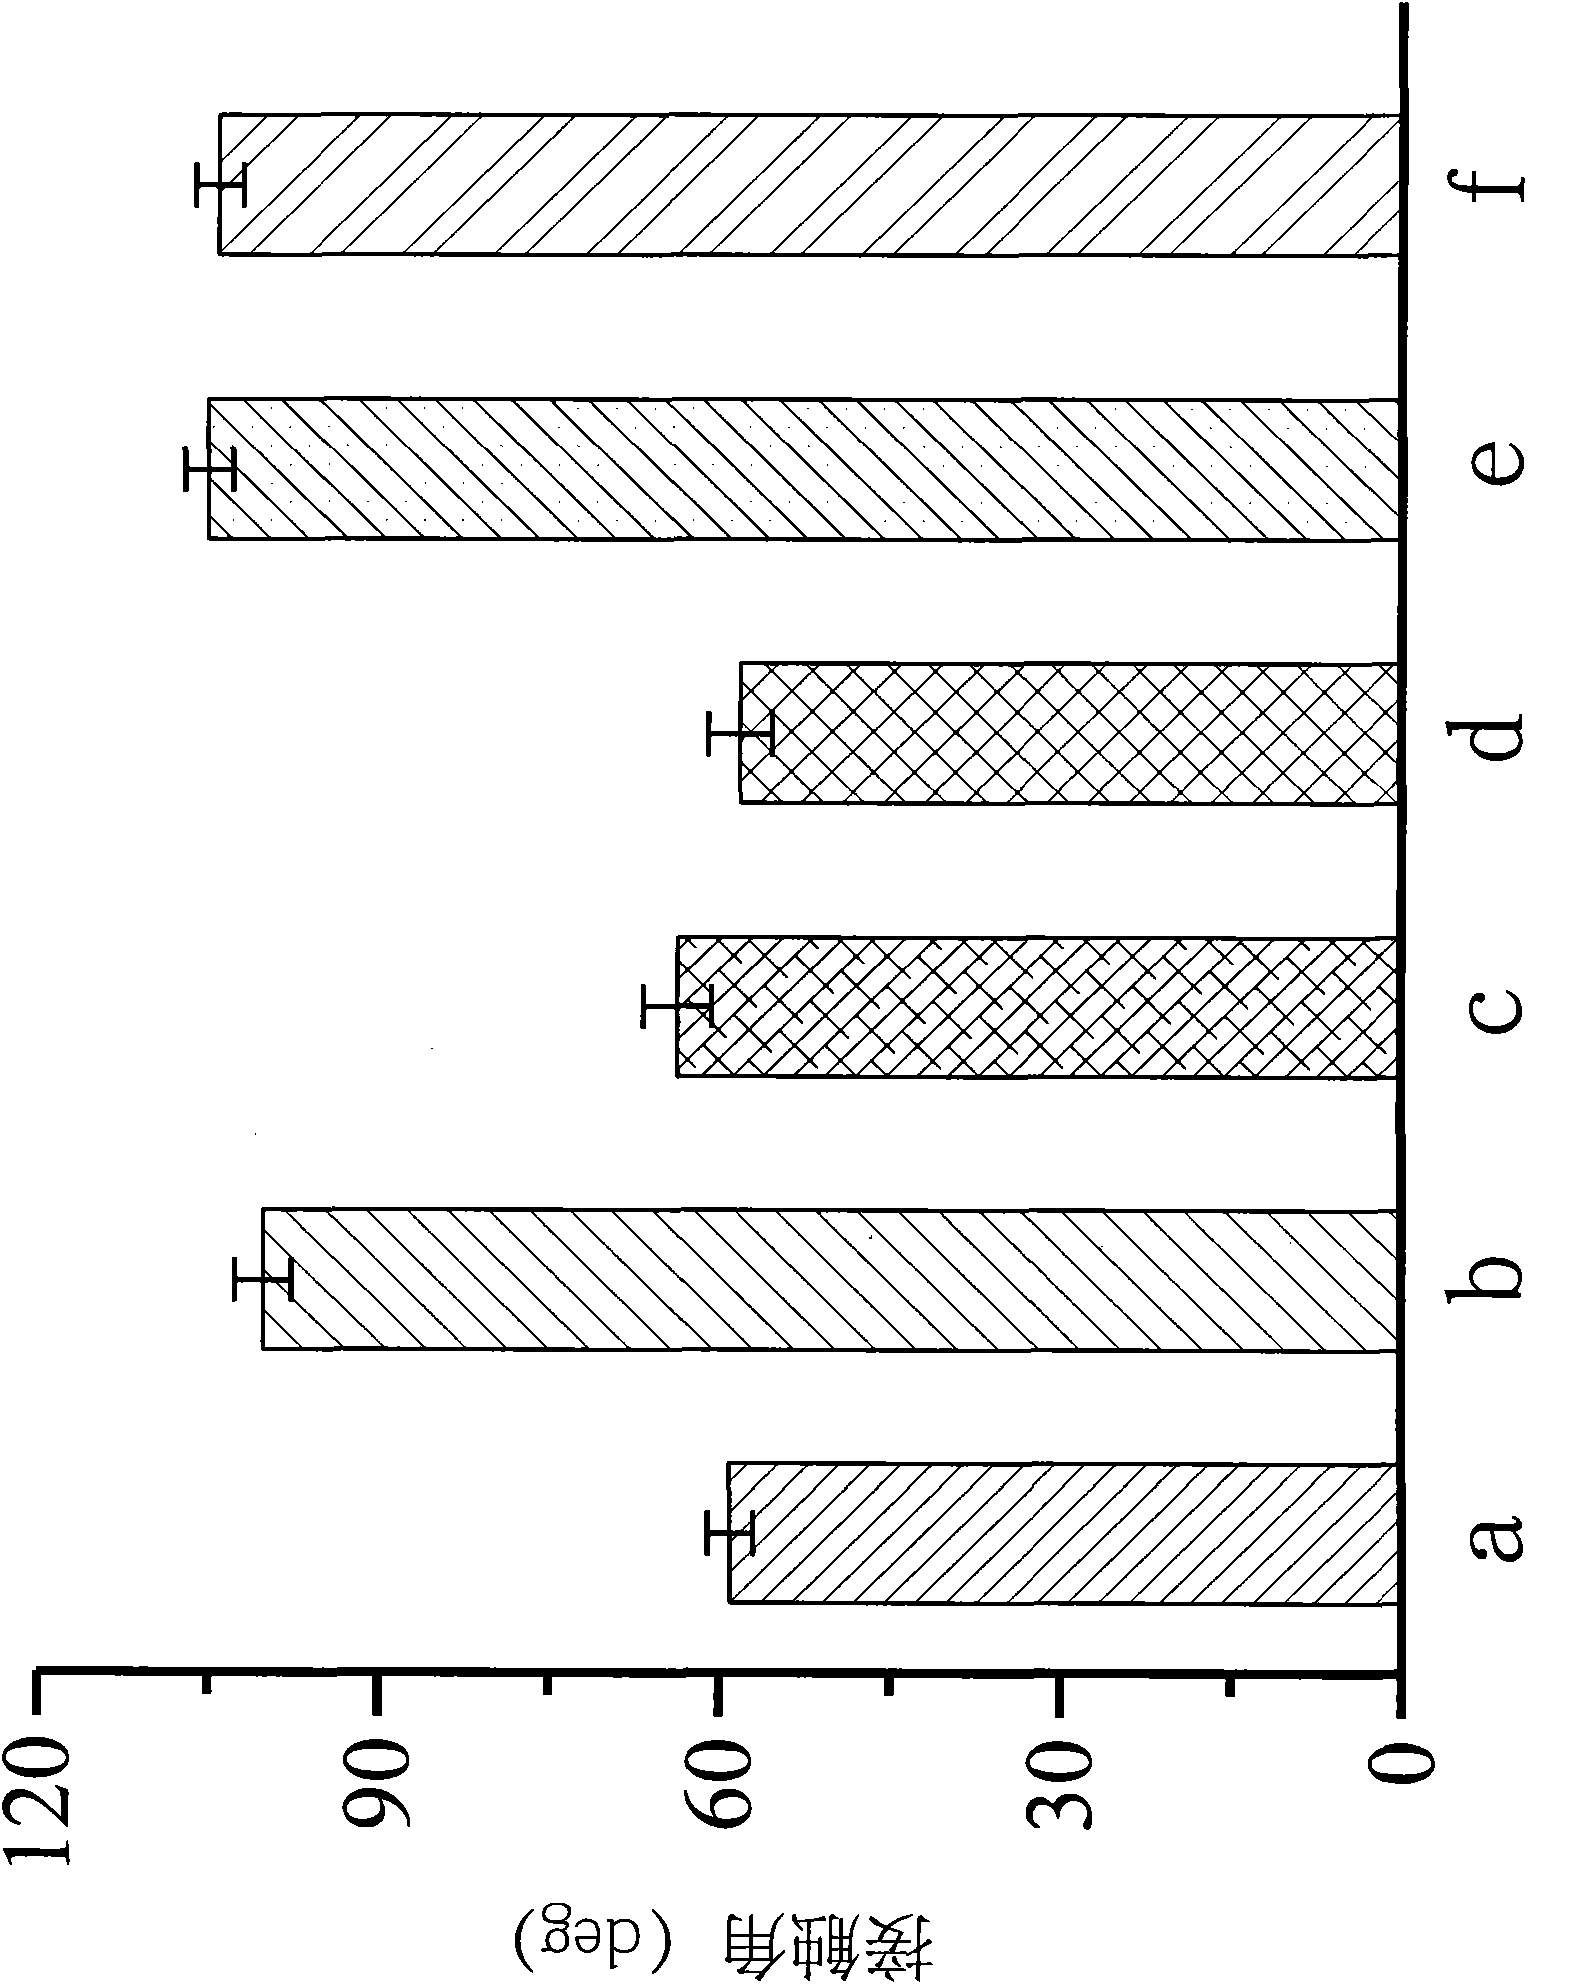 Optical lens, molecular thin film coated on such optical lens, and manufacturing method of such molecular thin film